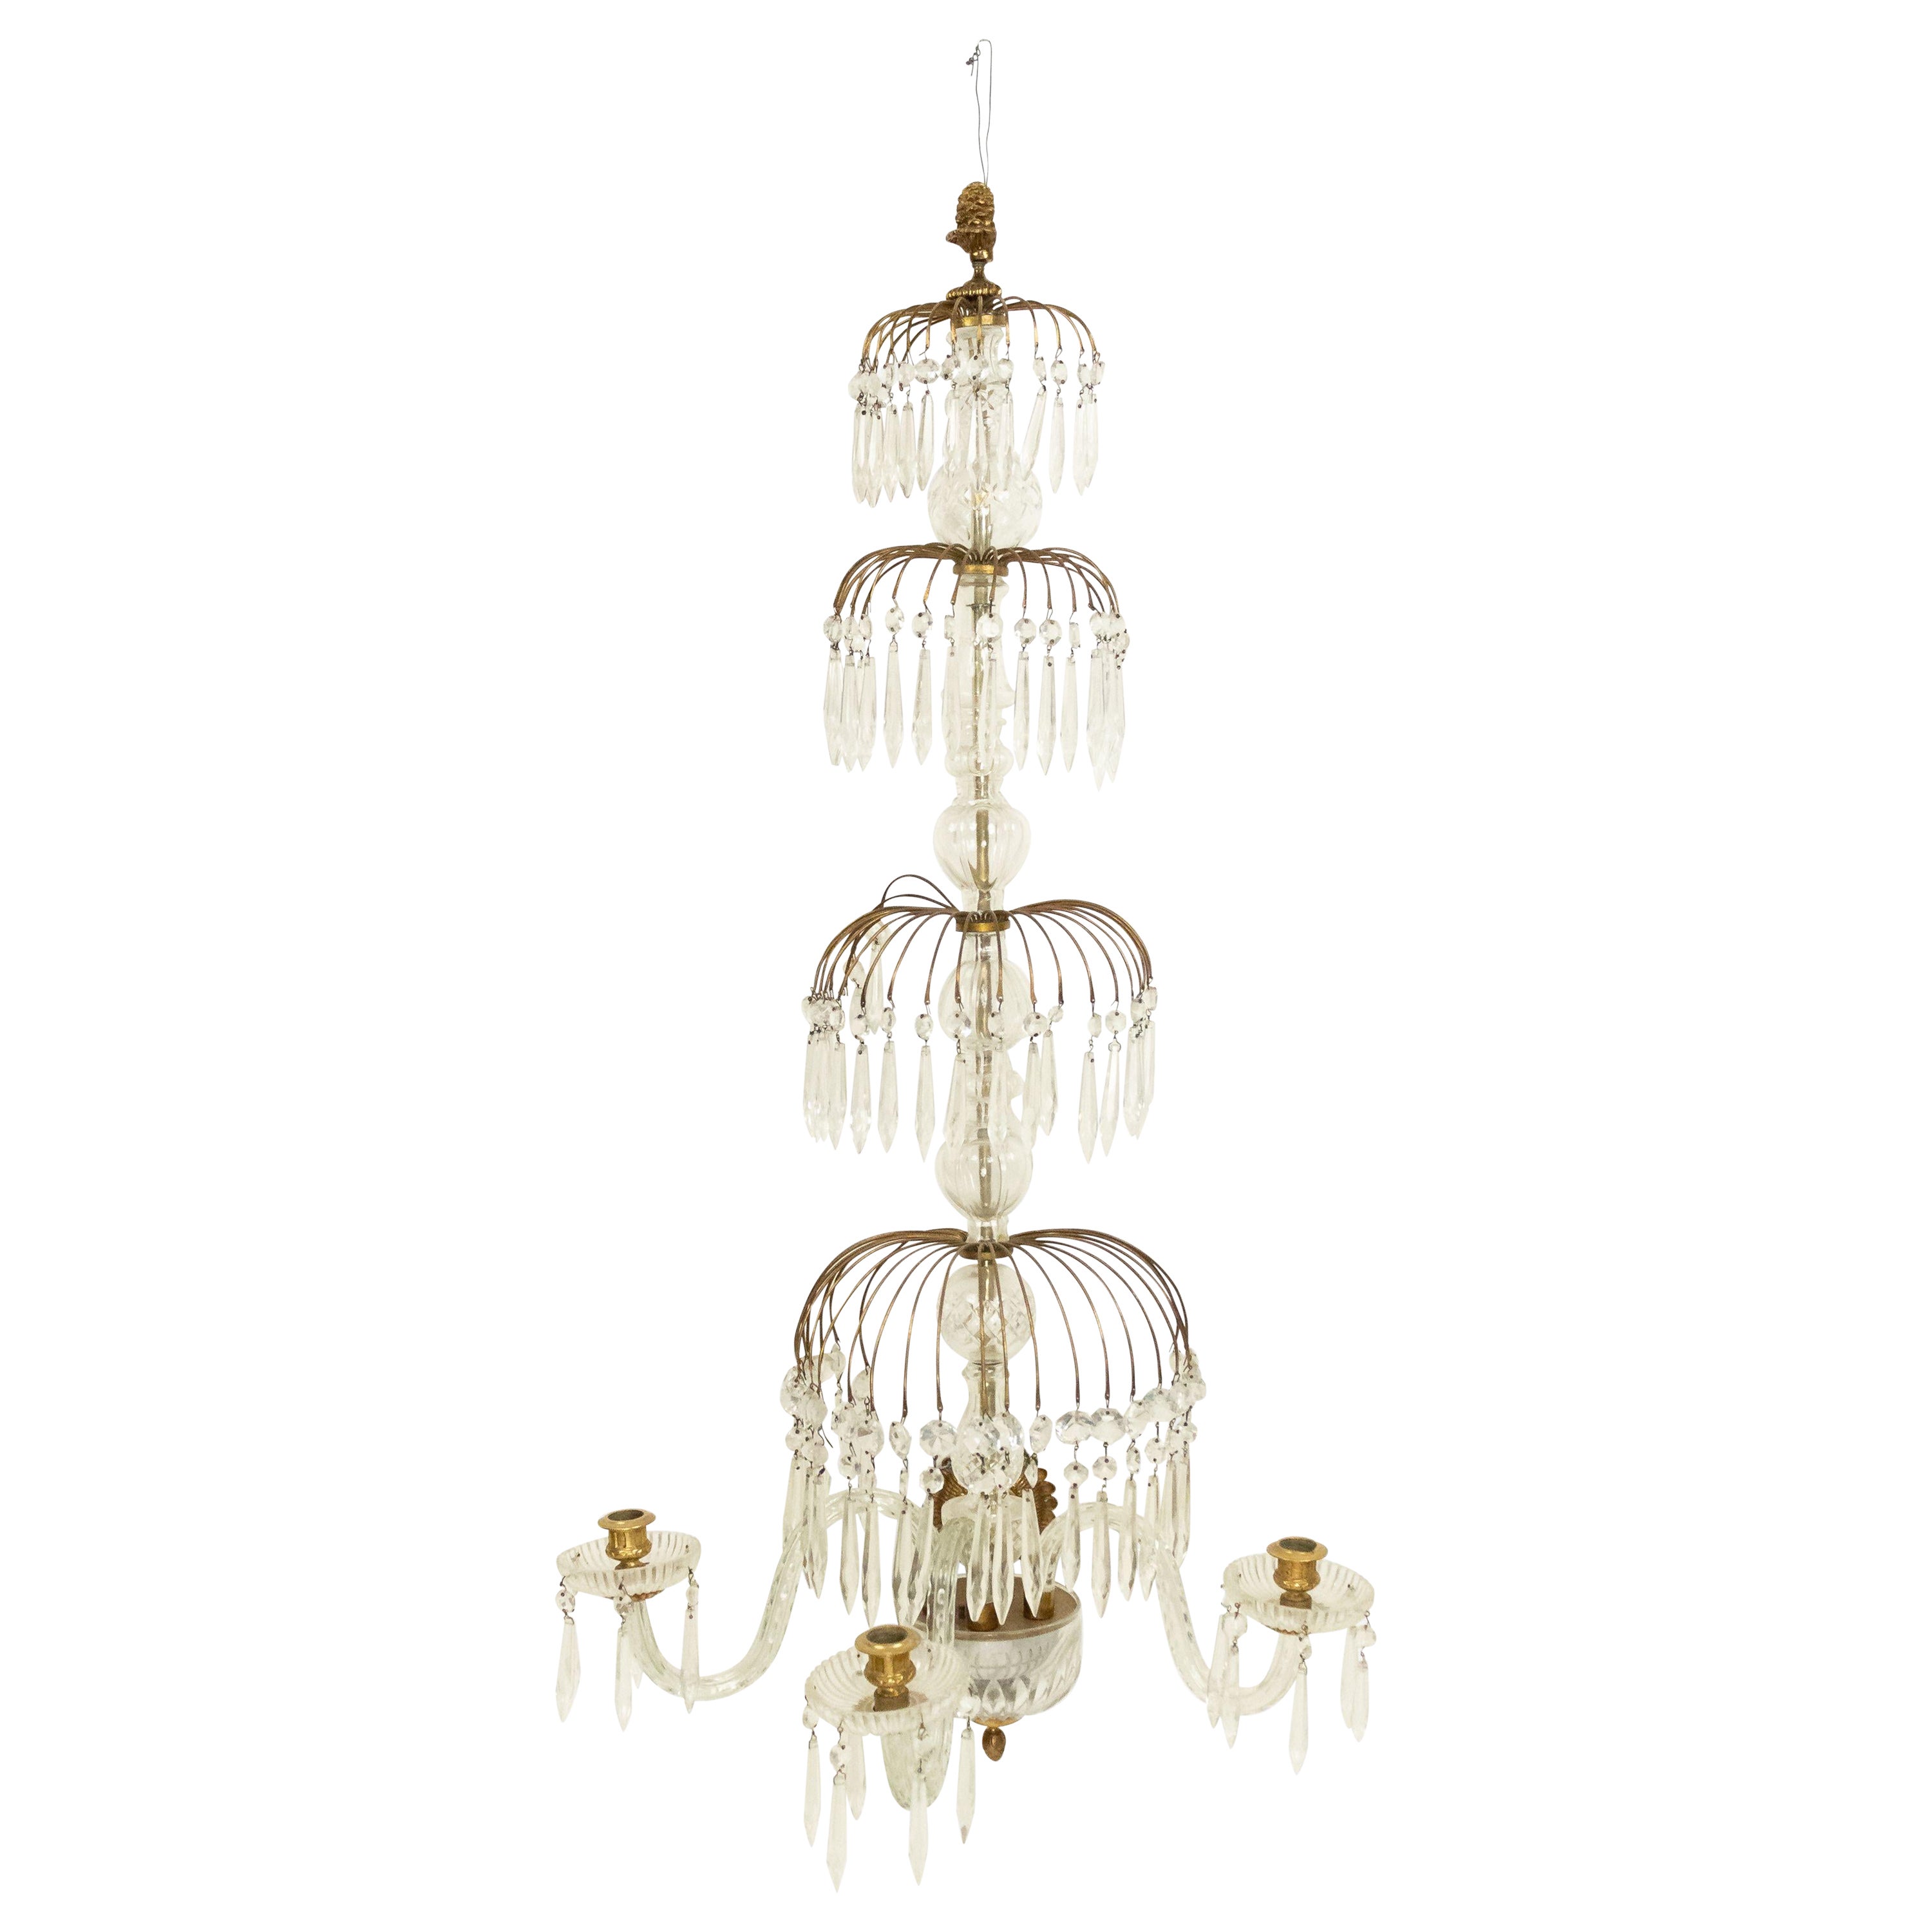 English Regency Style Monumental Crystal and Brass Tiered Wall Sconce For Sale